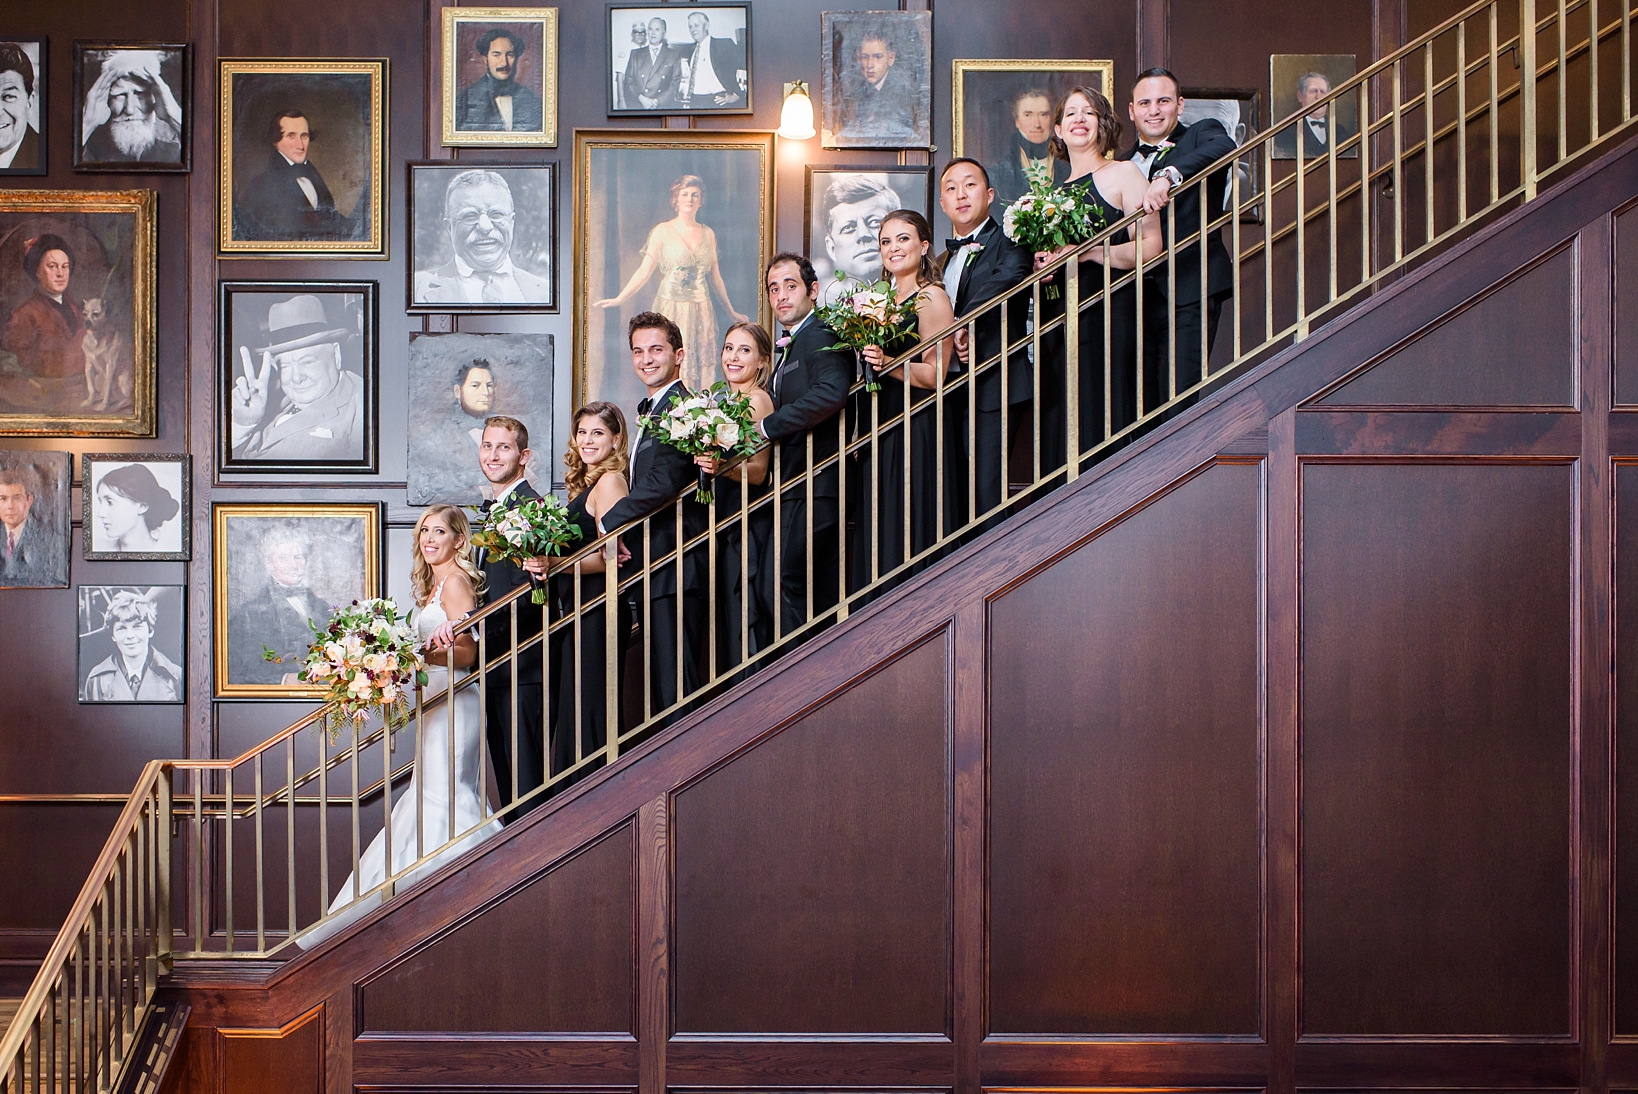 The complete bridal party on the steps of Oxford Exchange in Tampa, FL